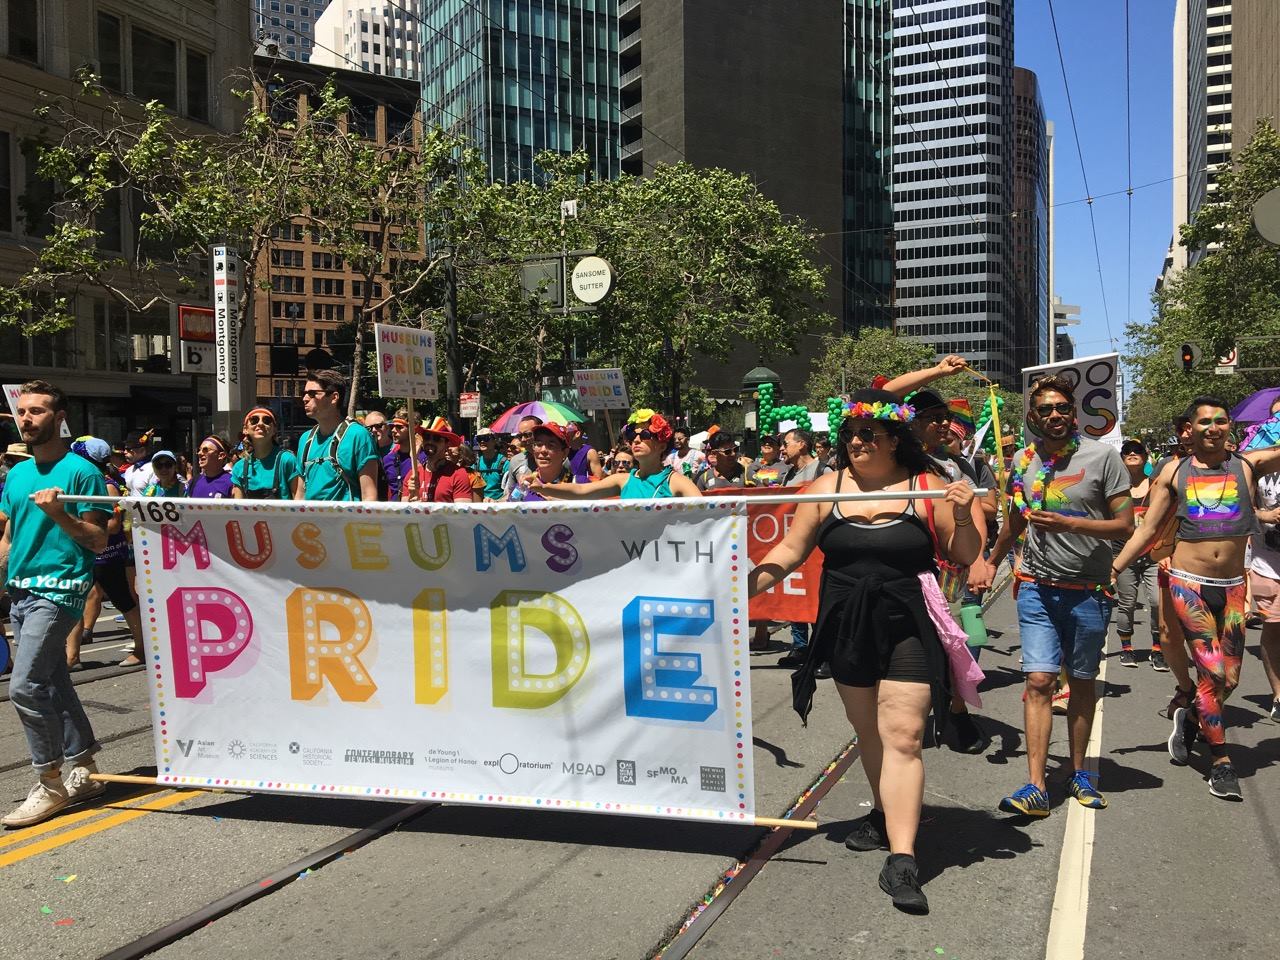 Museums with pride sign